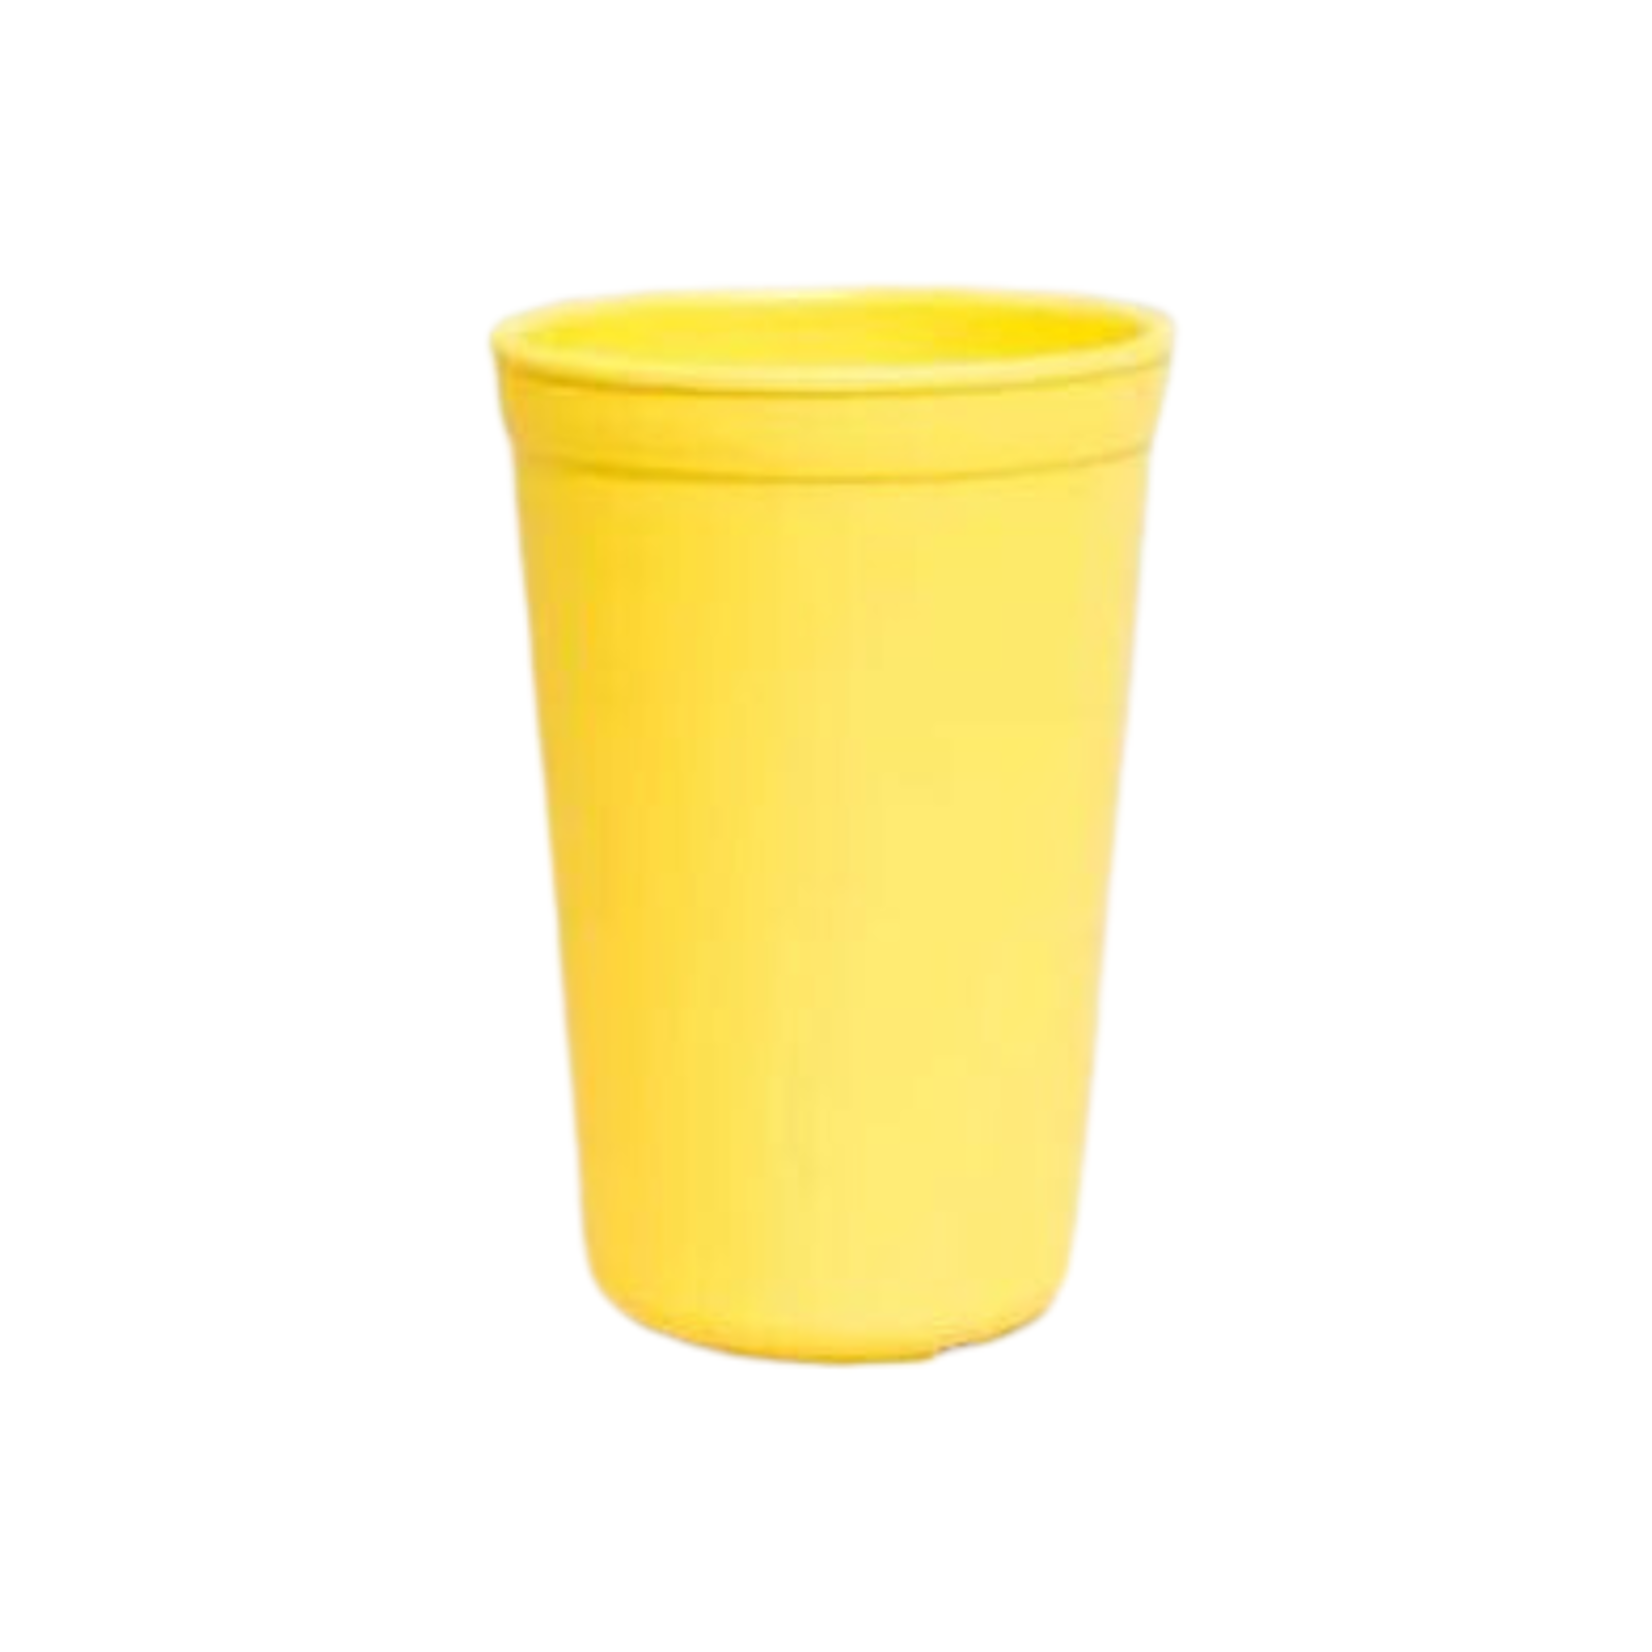 Replay Replay Drinking Cups Yellow